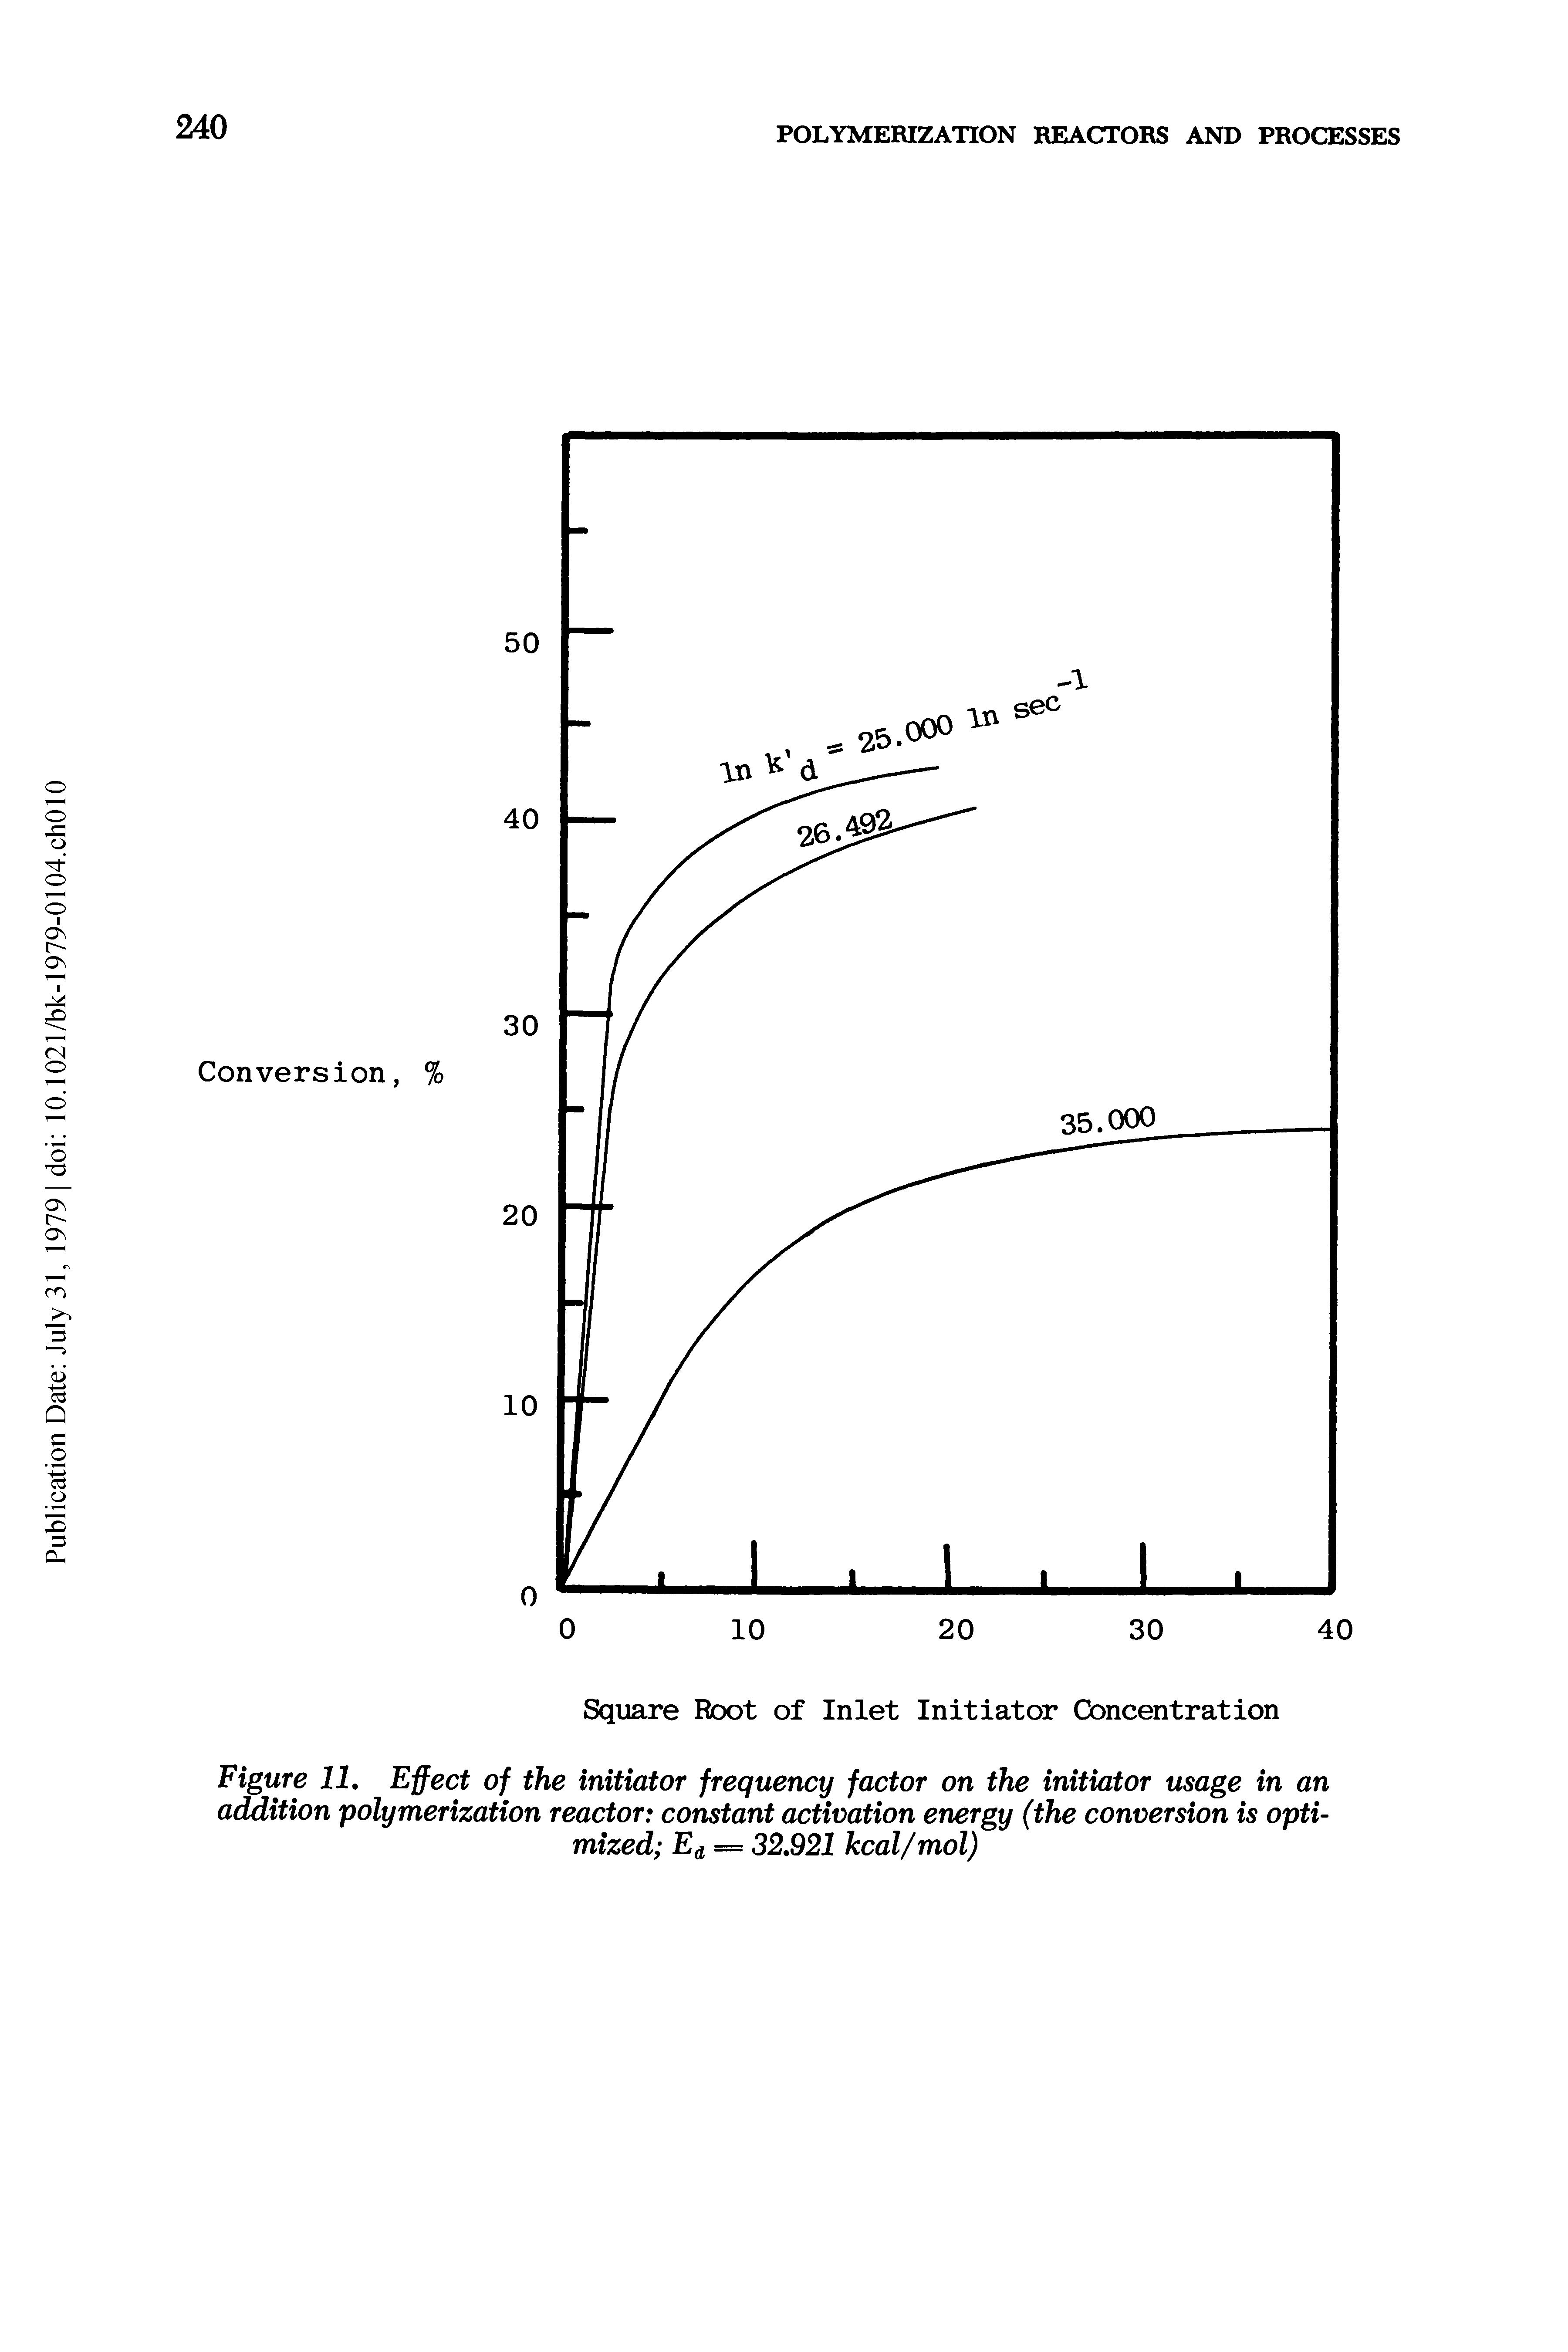 Figure 11, Effect of the initiator frequency factor on the initiator usage in an addition polymerization reactor constant activation energy (the conversion is optimized Ea = 32,921 heal/mol)...